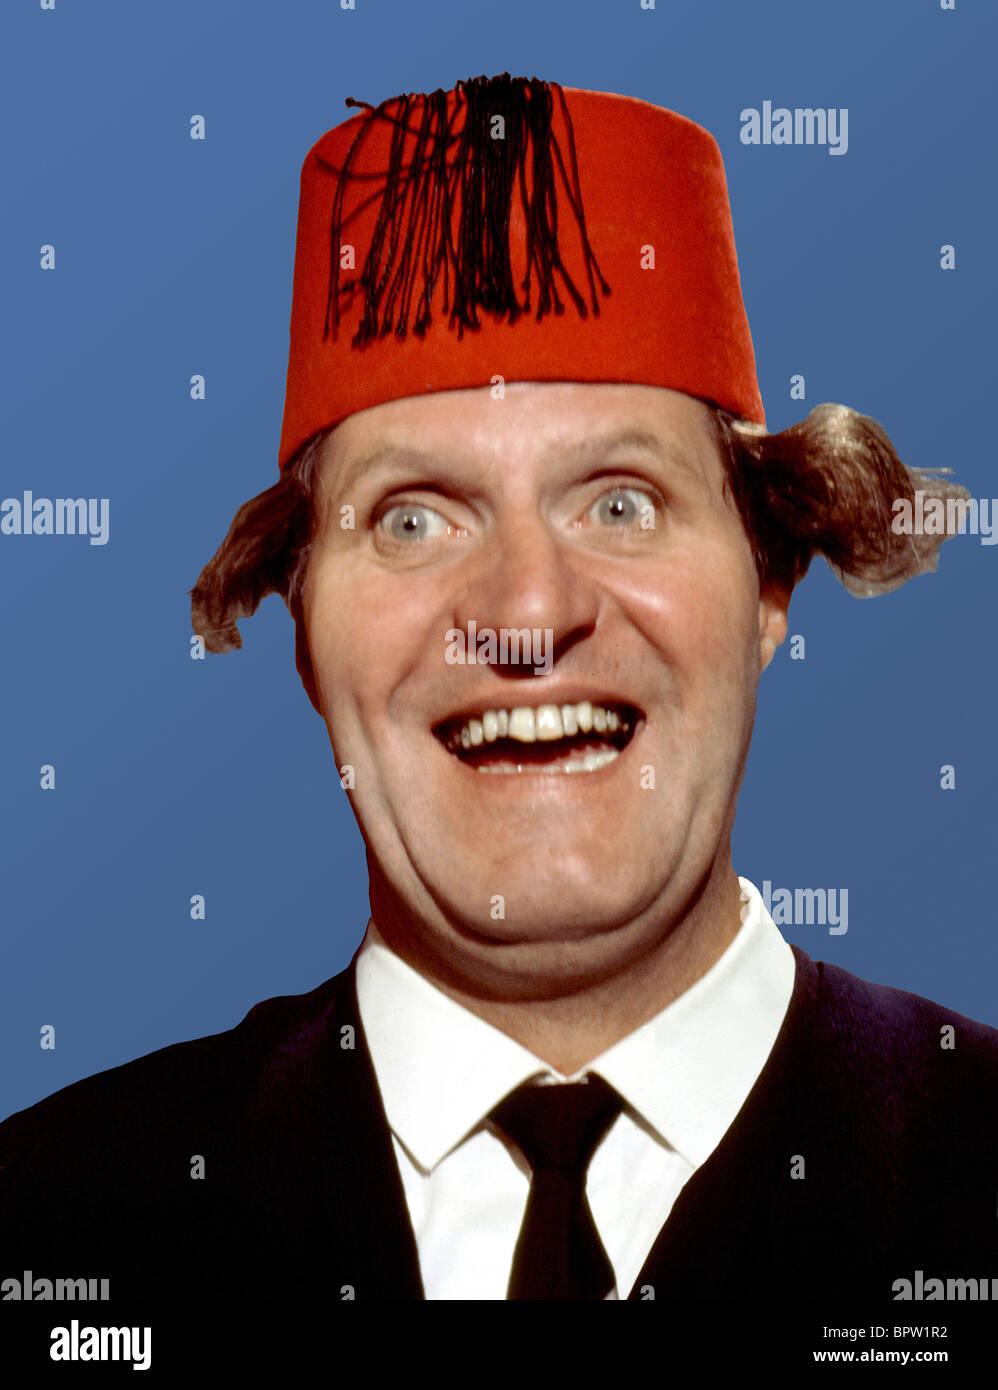 TOMMY COOPER COMEDIAN (1958 Stock Photo - Alamy